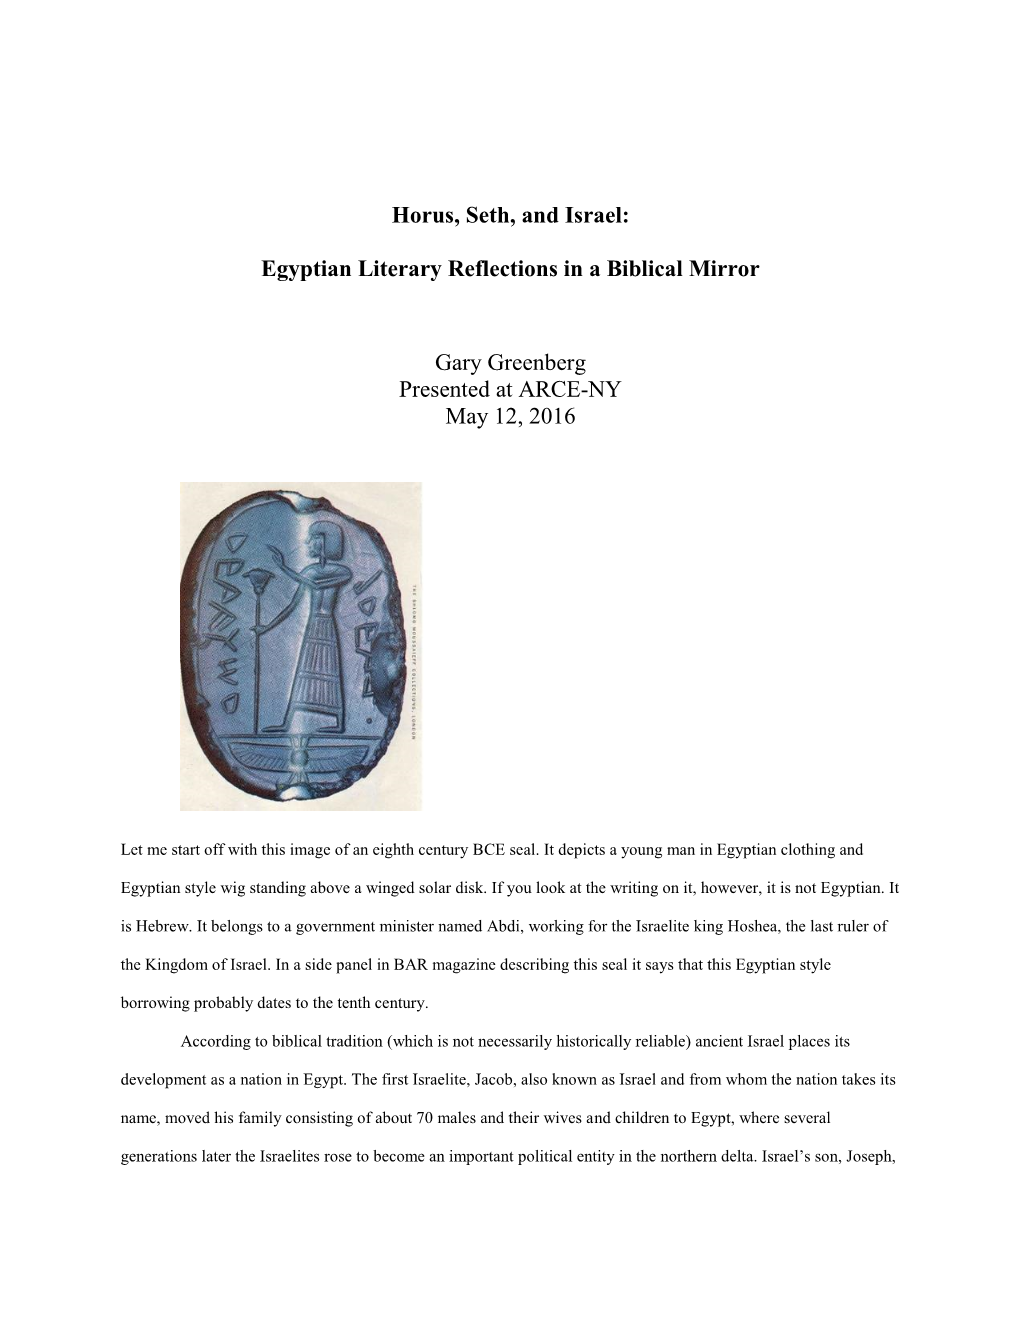 Horus, Seth, and Israel: Egyptian Literary Reflections in a Biblical